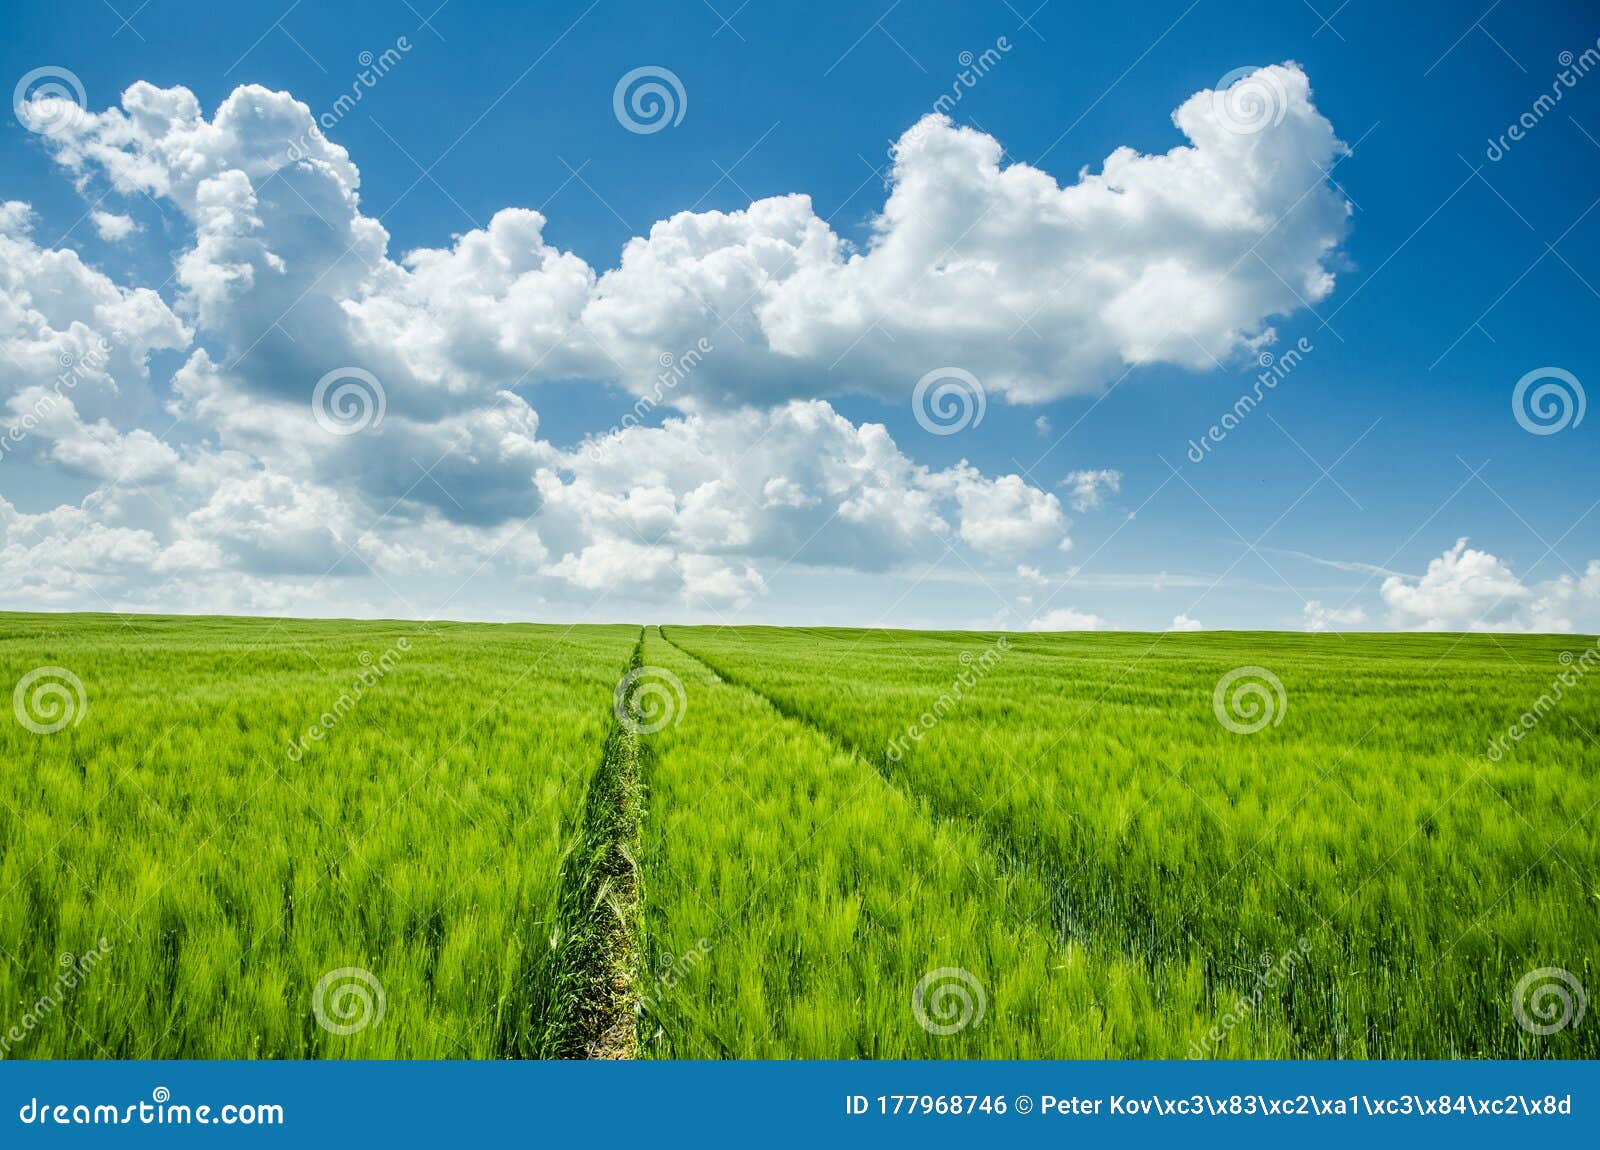 Spring Green Agricultural Field Under Clear Blue Cloudy Sky - Wallpaper or  Background Photo Stock Photo - Image of copy, food: 177968746